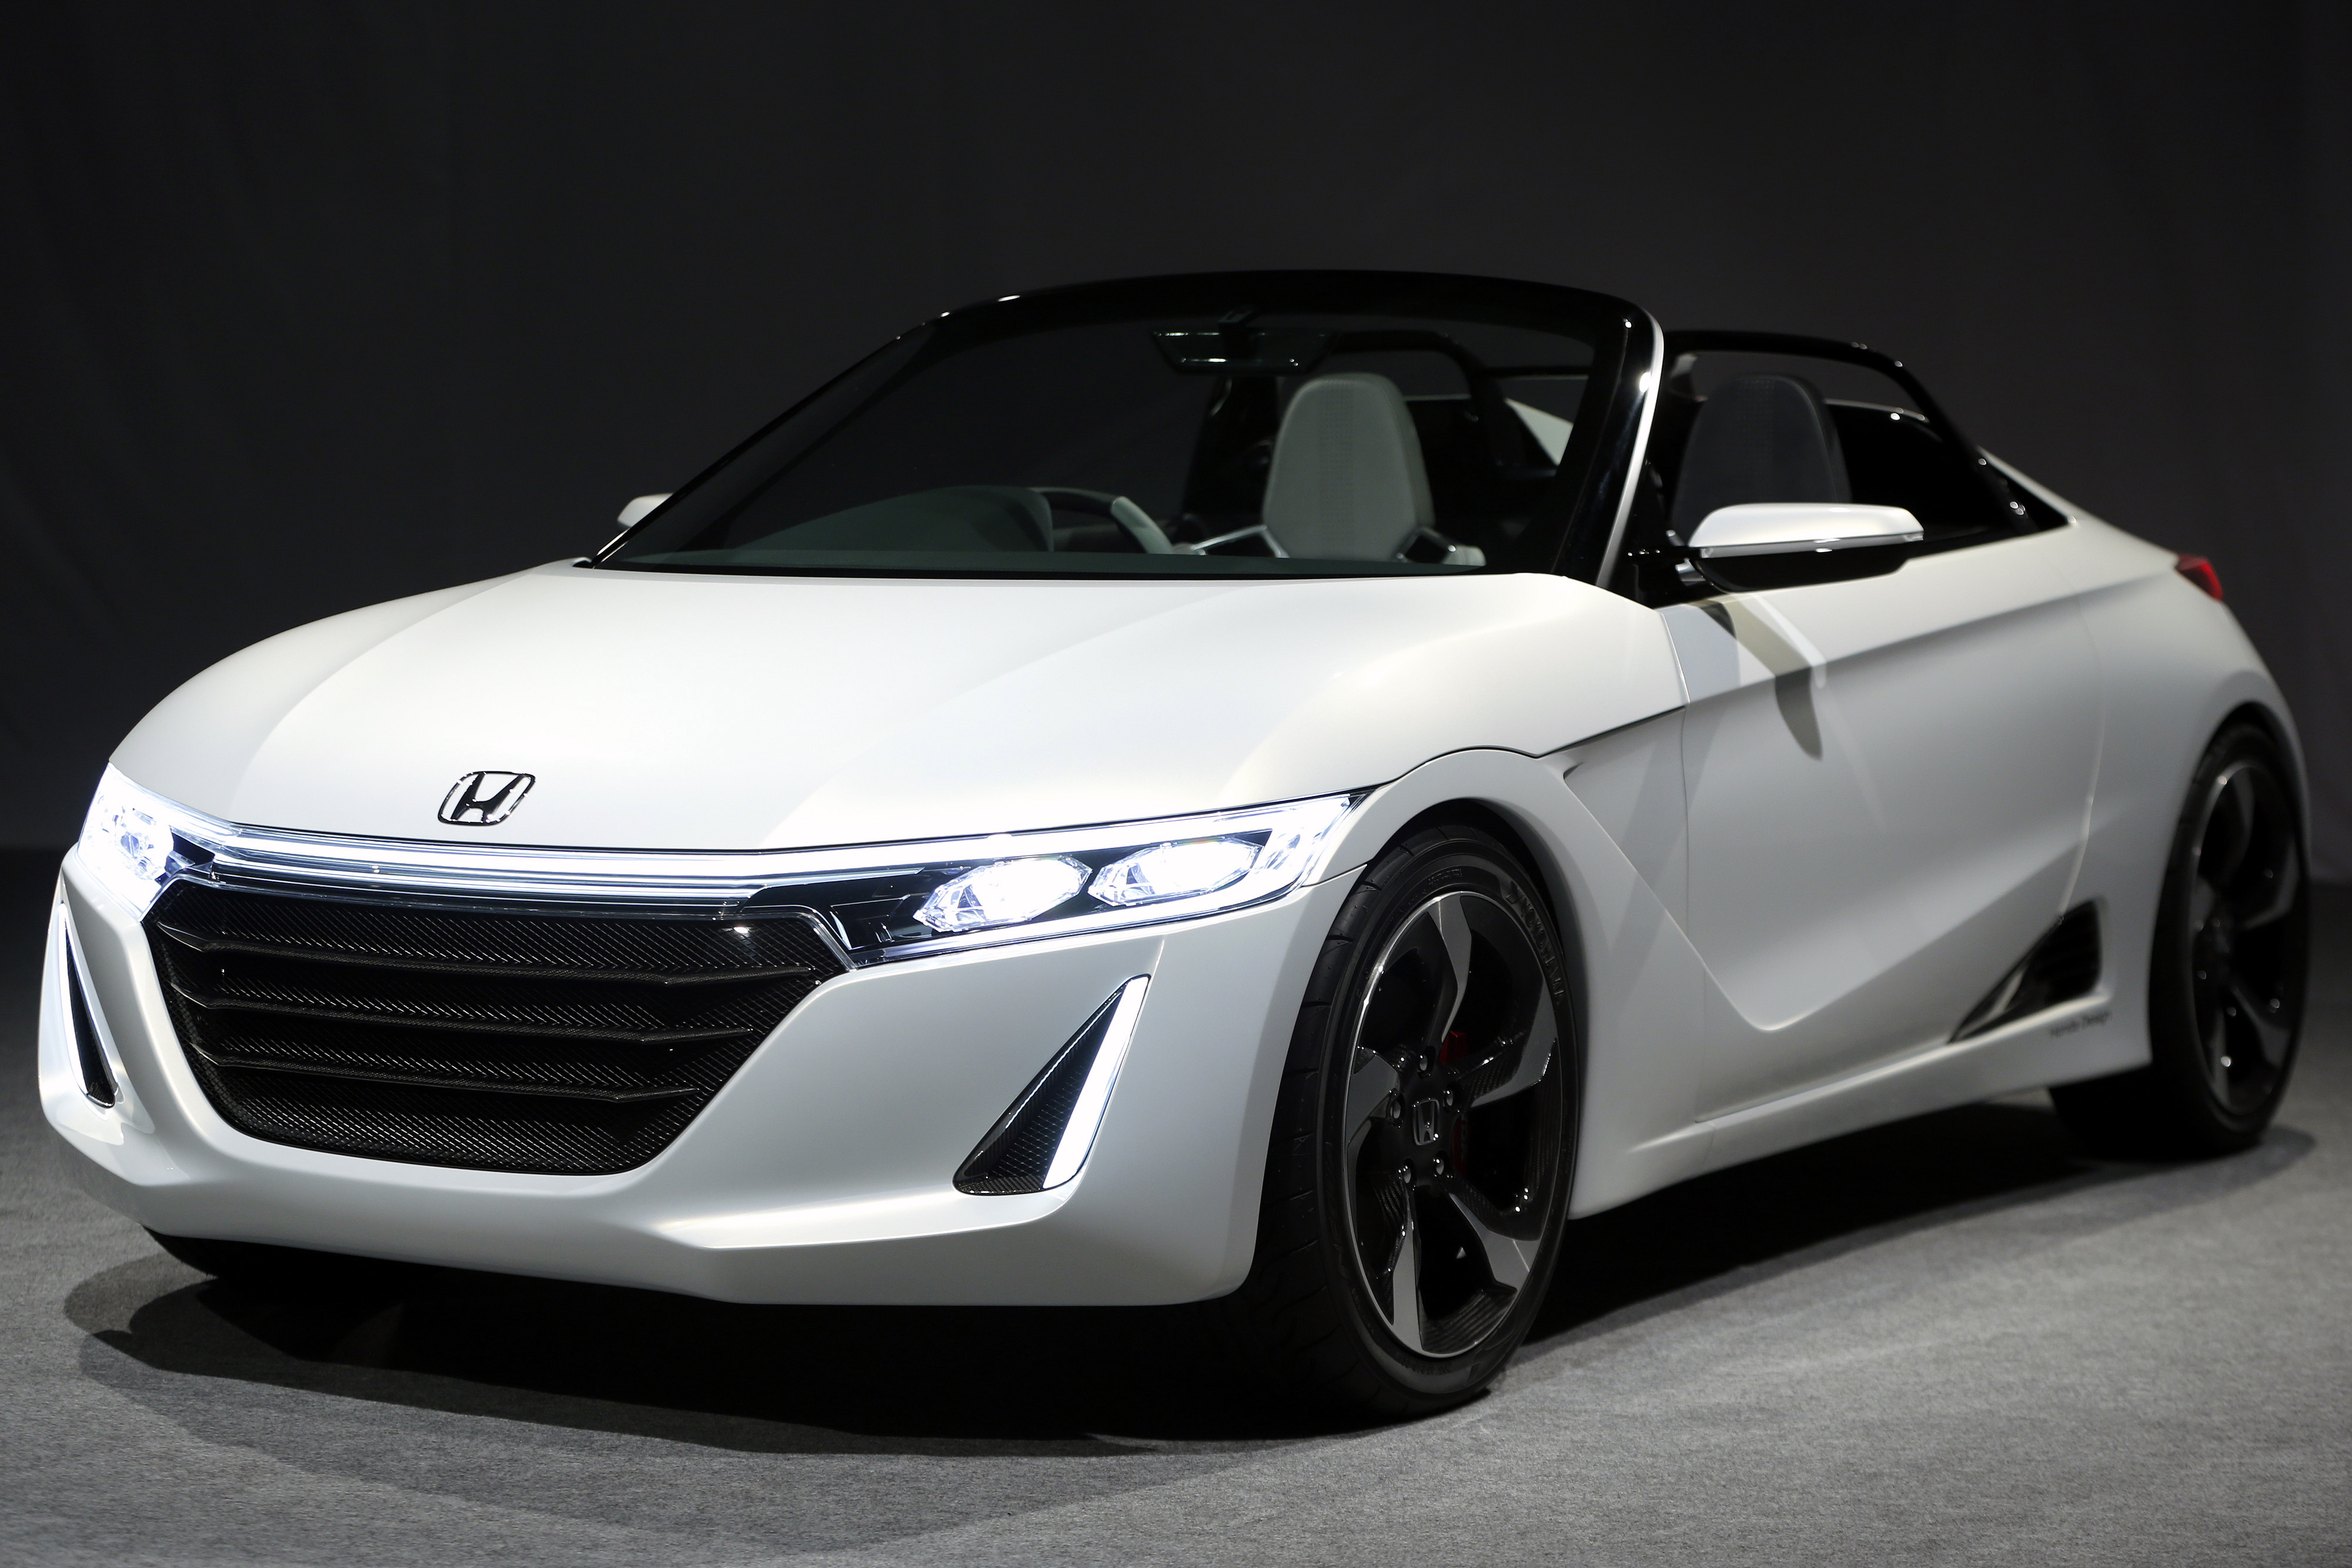 Honda S660 Gets Over-The-Top Treatment From Liberty Walk